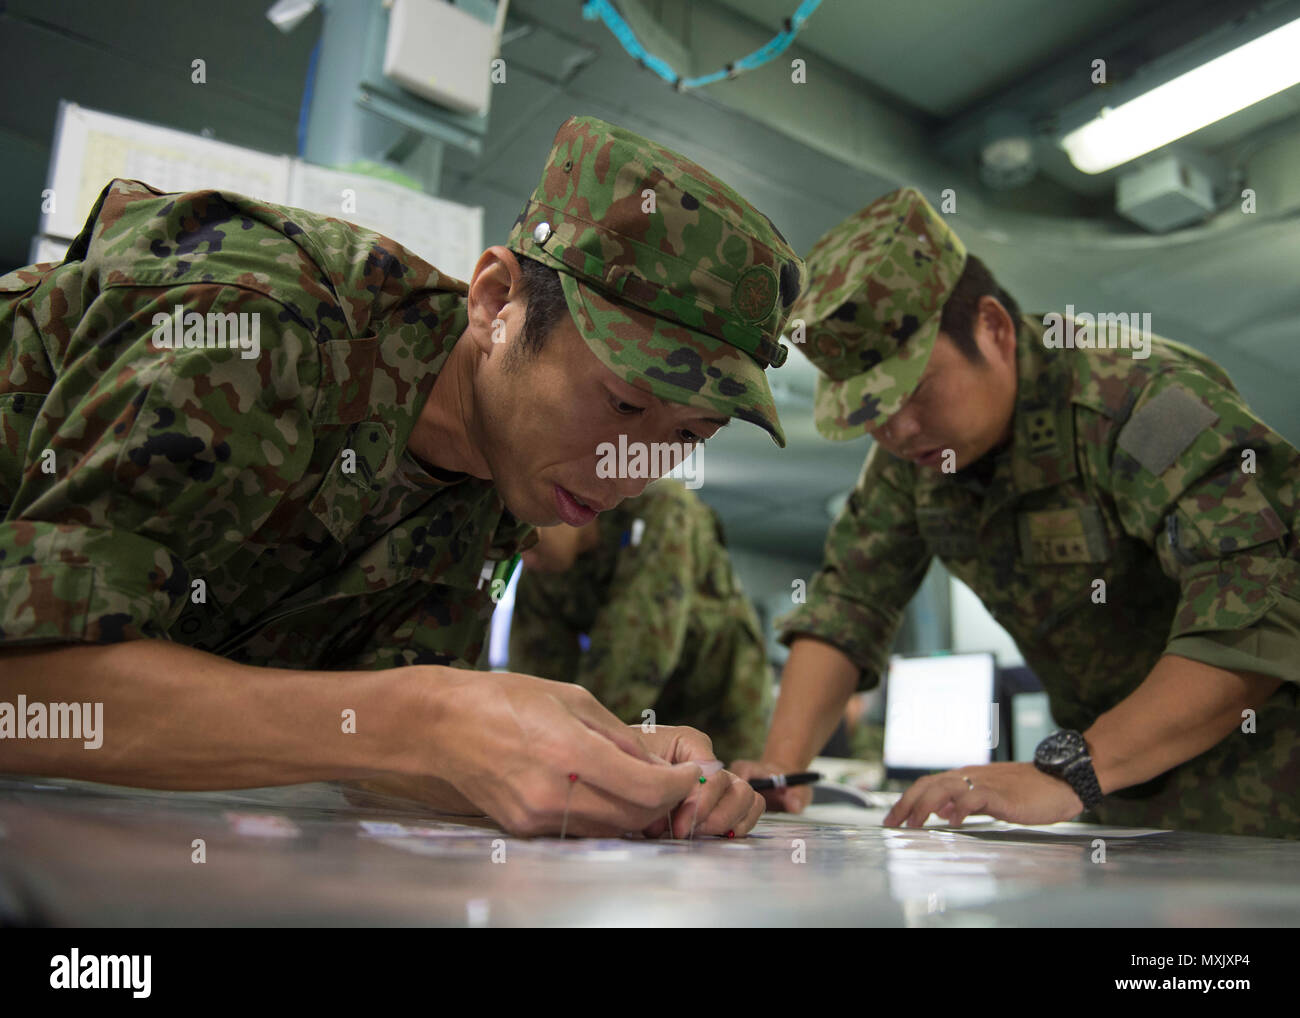 161108-N-ZK021-012 PACIFIC OCEAN (Nov. 8, 2016) - Sergeant First Class Tomoyuki Kjawano updates the plot board in the Flag Information Center (FIC) during Keen Sword 2017. Keen Sword 17 is a joint and bilateral field training exercise (FTX) between U.S. and Japanese forces meant to increase readiness and interoperability within the framework of the U.S. – Japan alliance. (U.S. Navy photo by Petty Officer First Class Nardel Gervacio/Released) Stock Photo